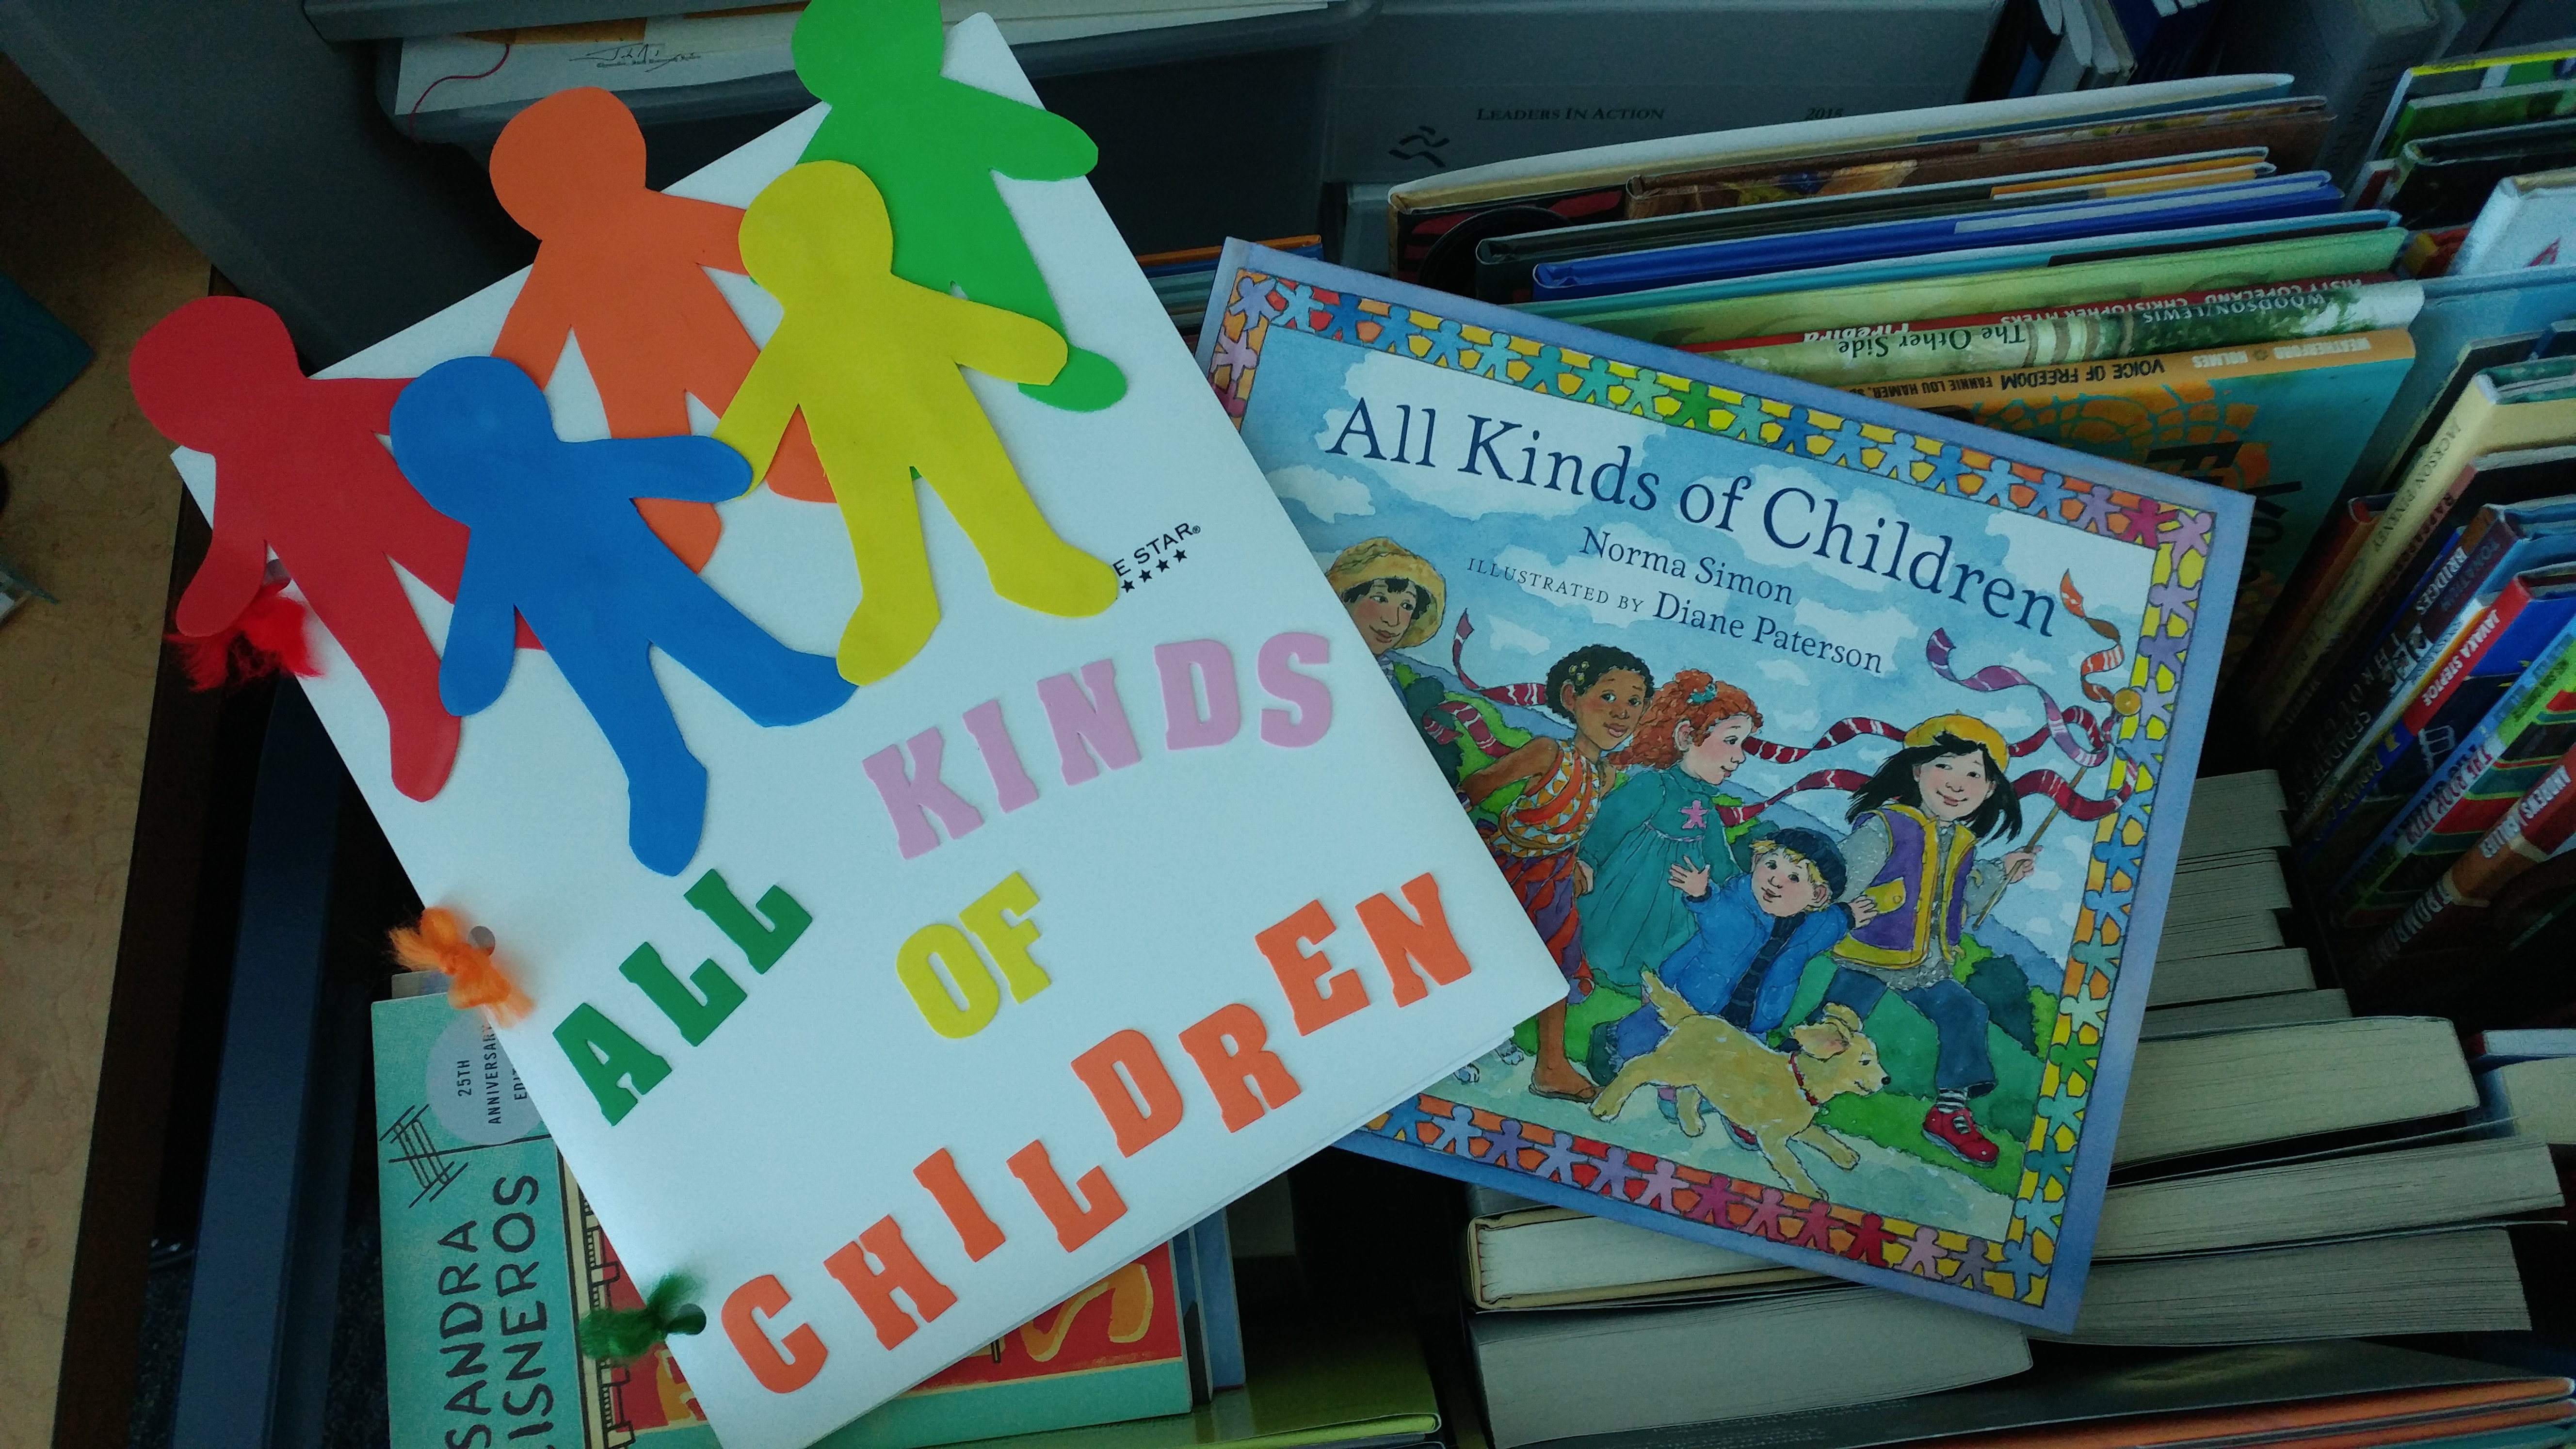 "All Kinds of Children" and the companion workbook made by UHCL students. Photo by The Signal reporter Leif Hayman.